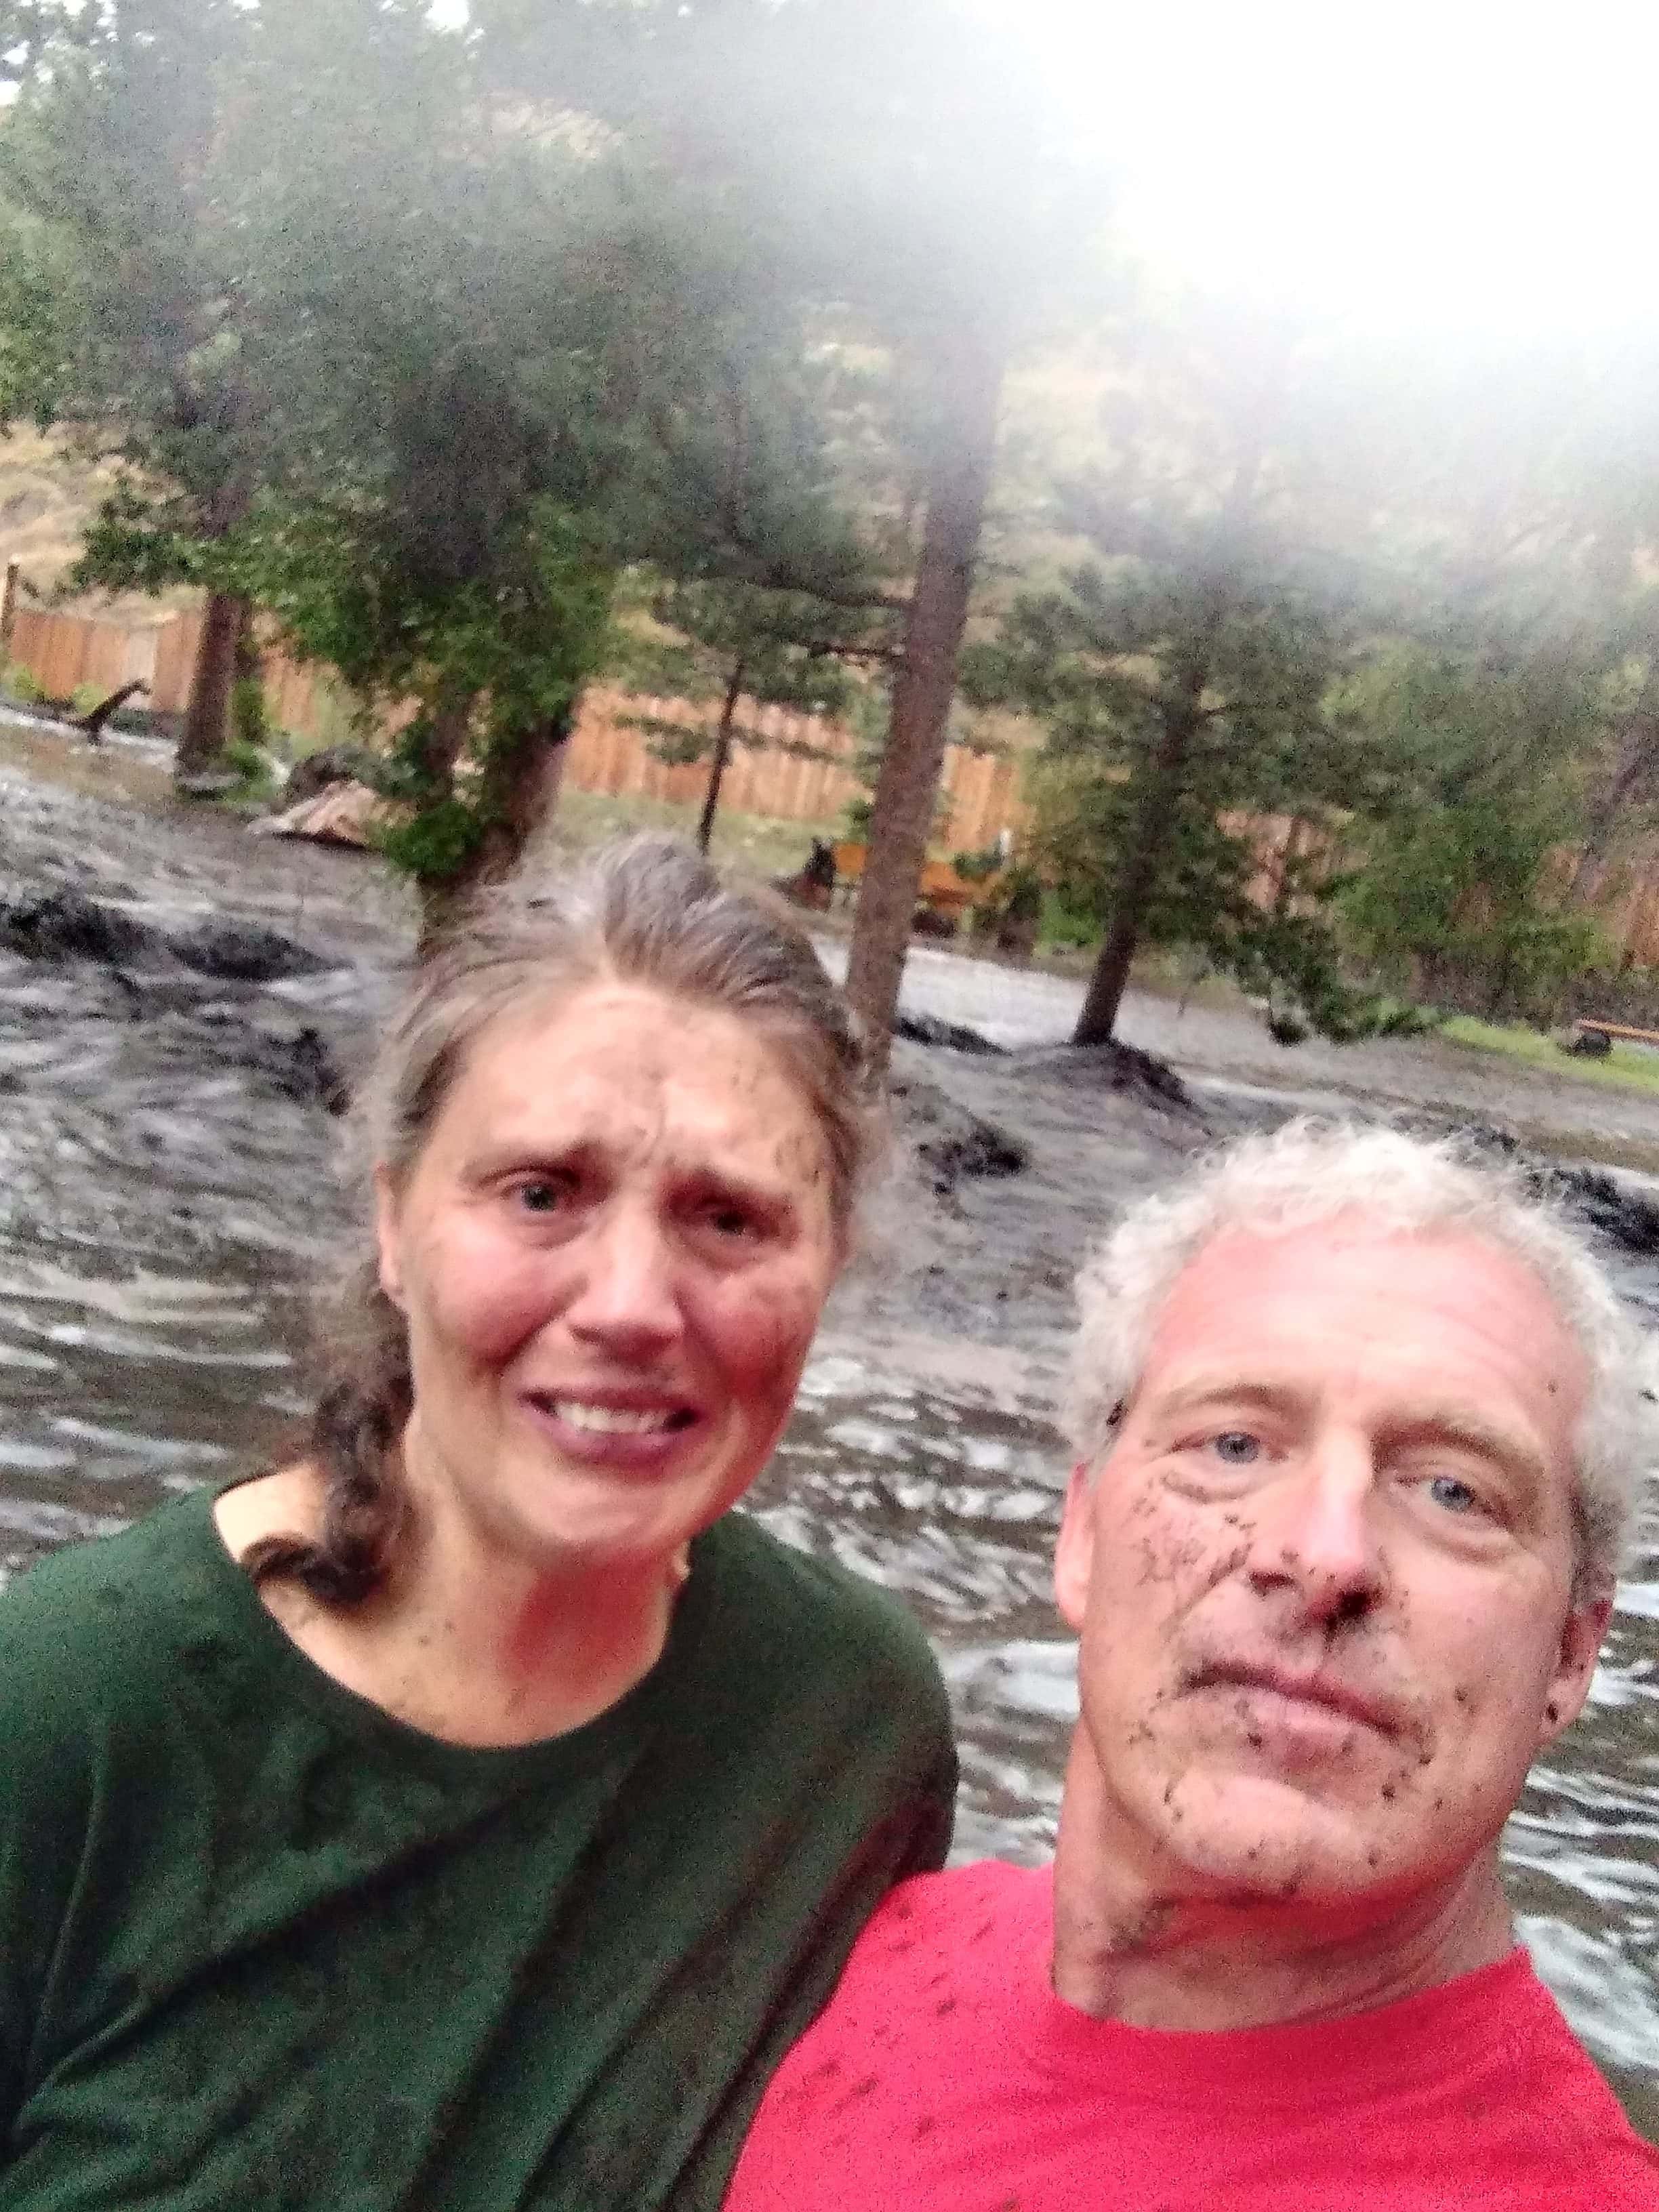 Kirk and his wife clean up after fire